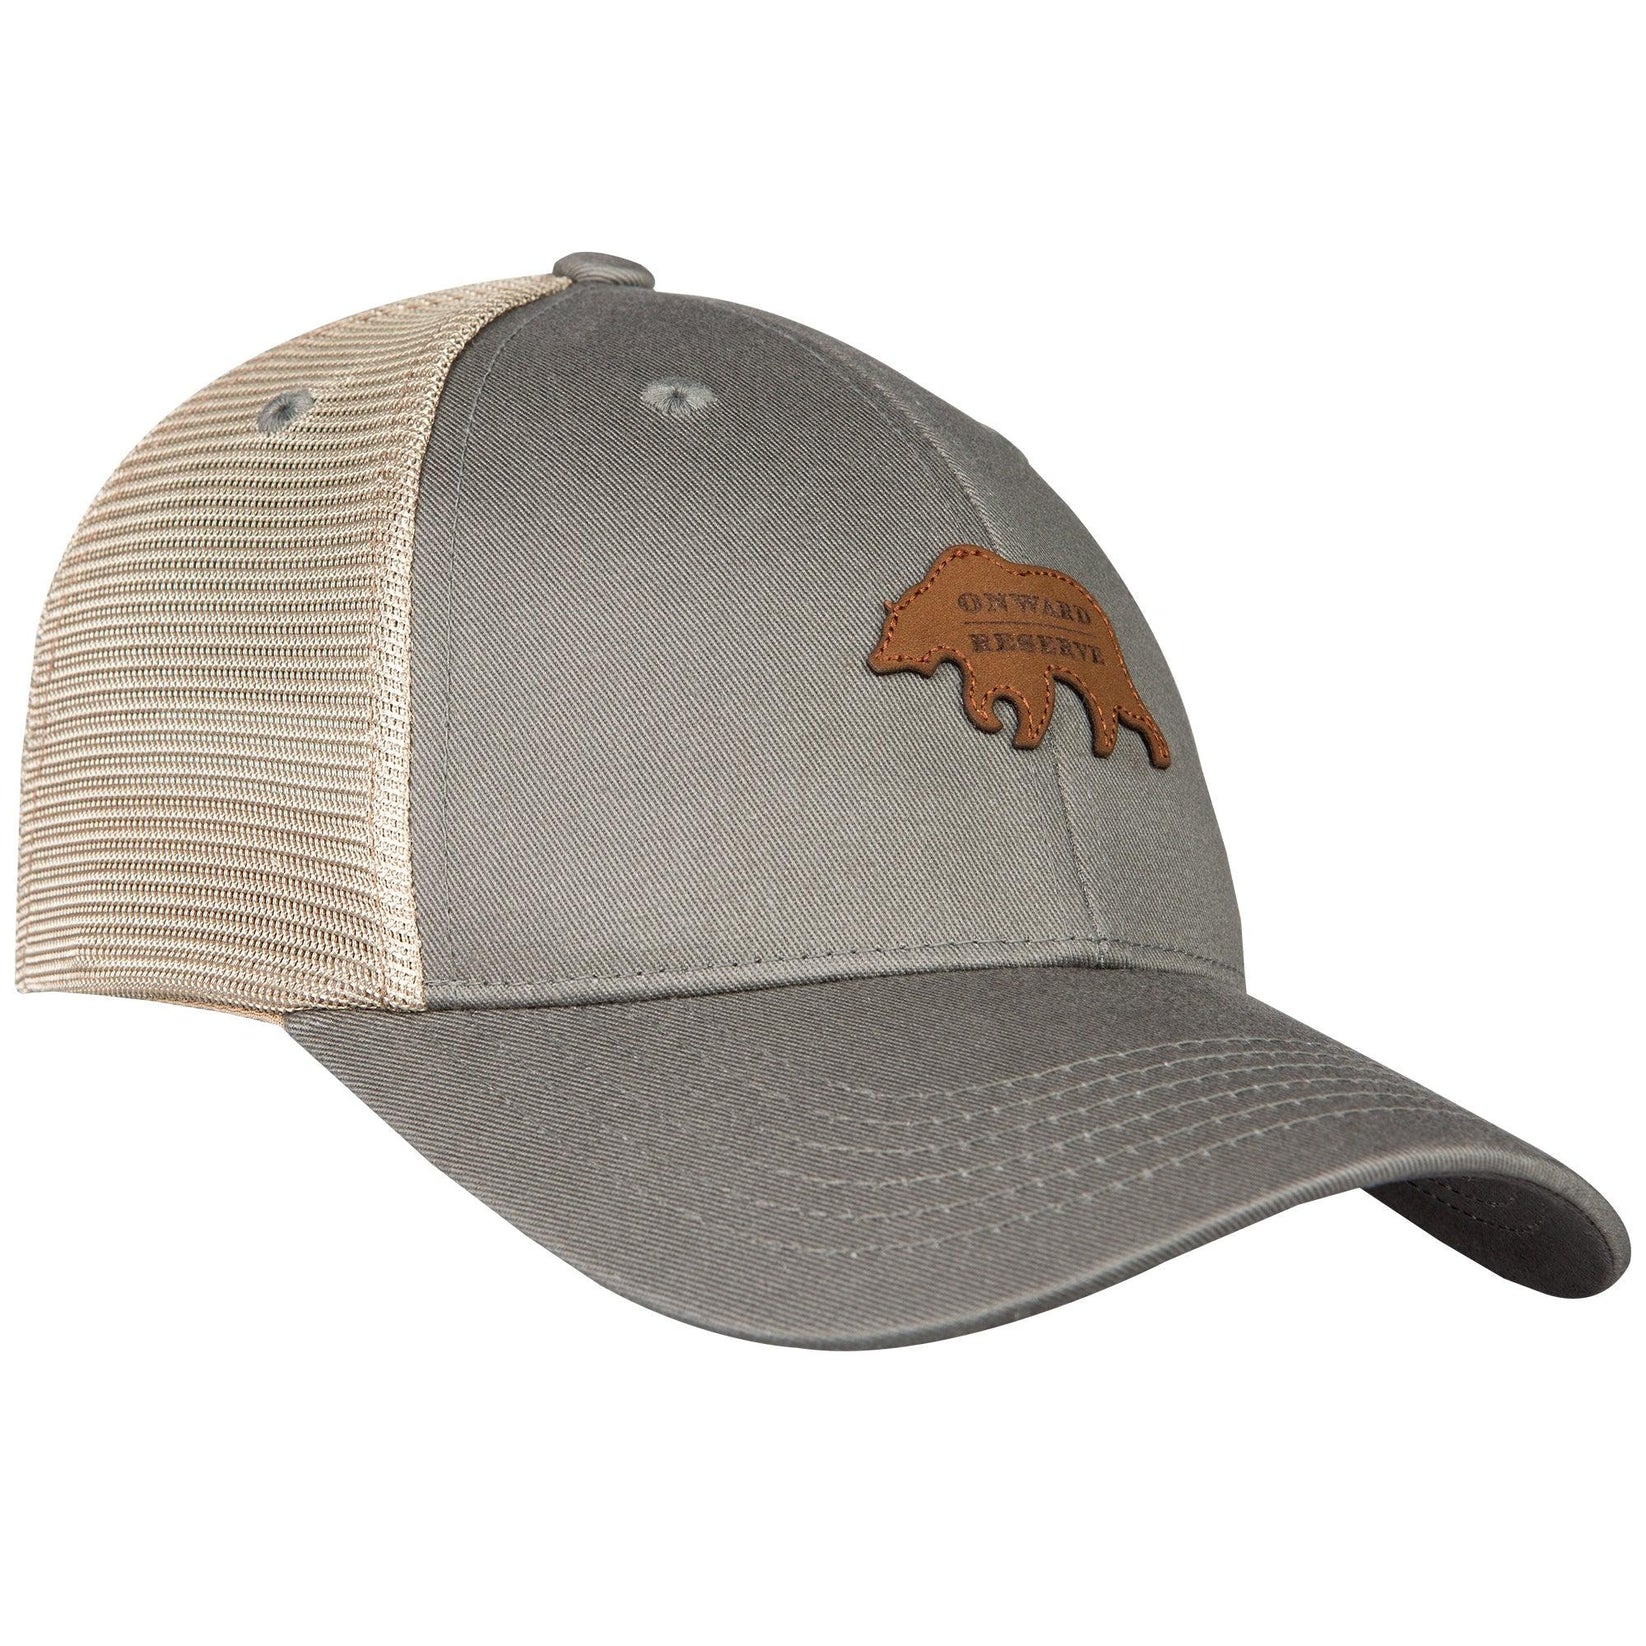 Leather Patch Trucker Hat – Onward Reserve